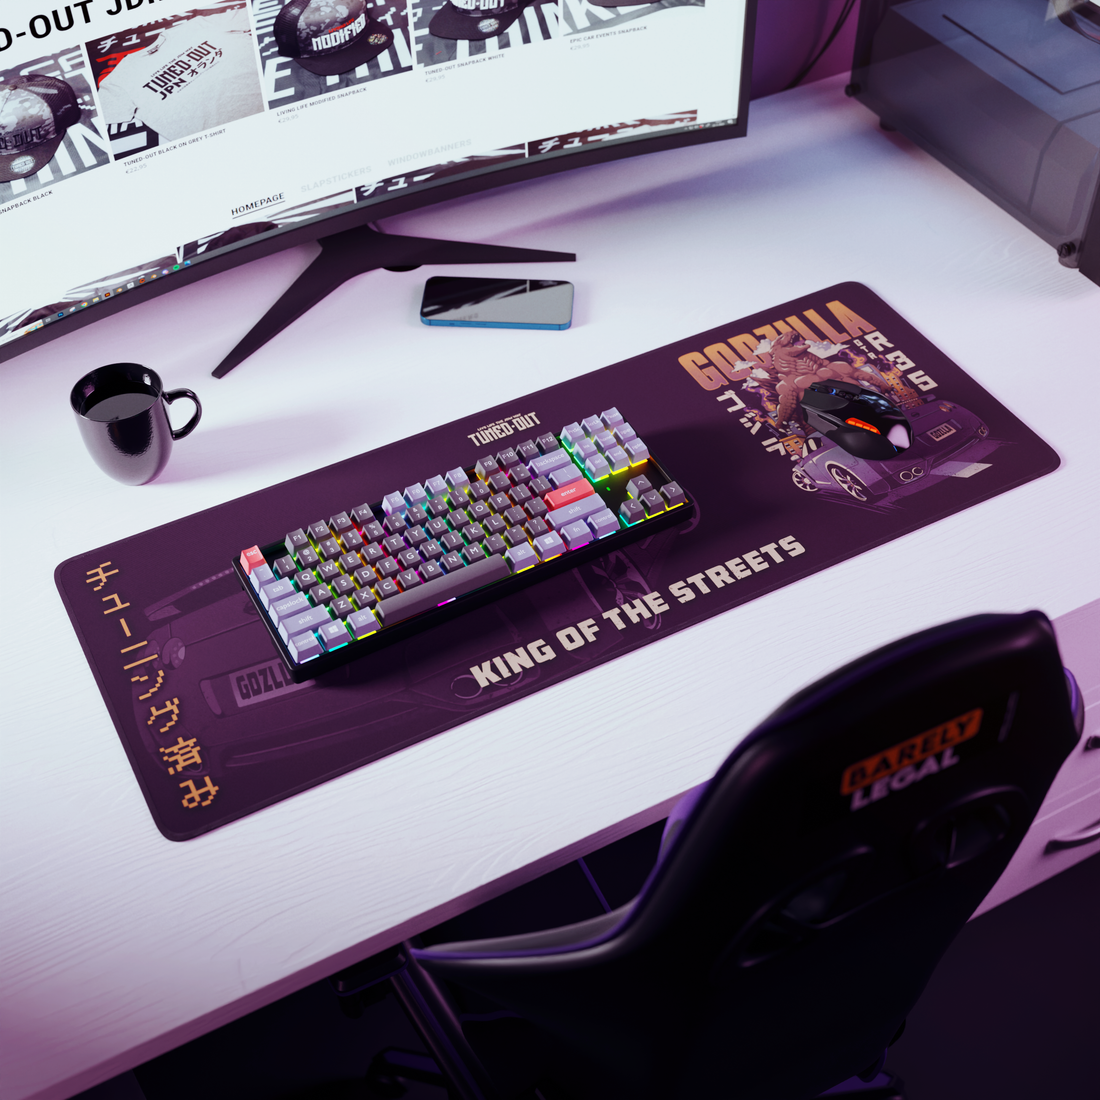 King of the Streets R35 Desk Mat